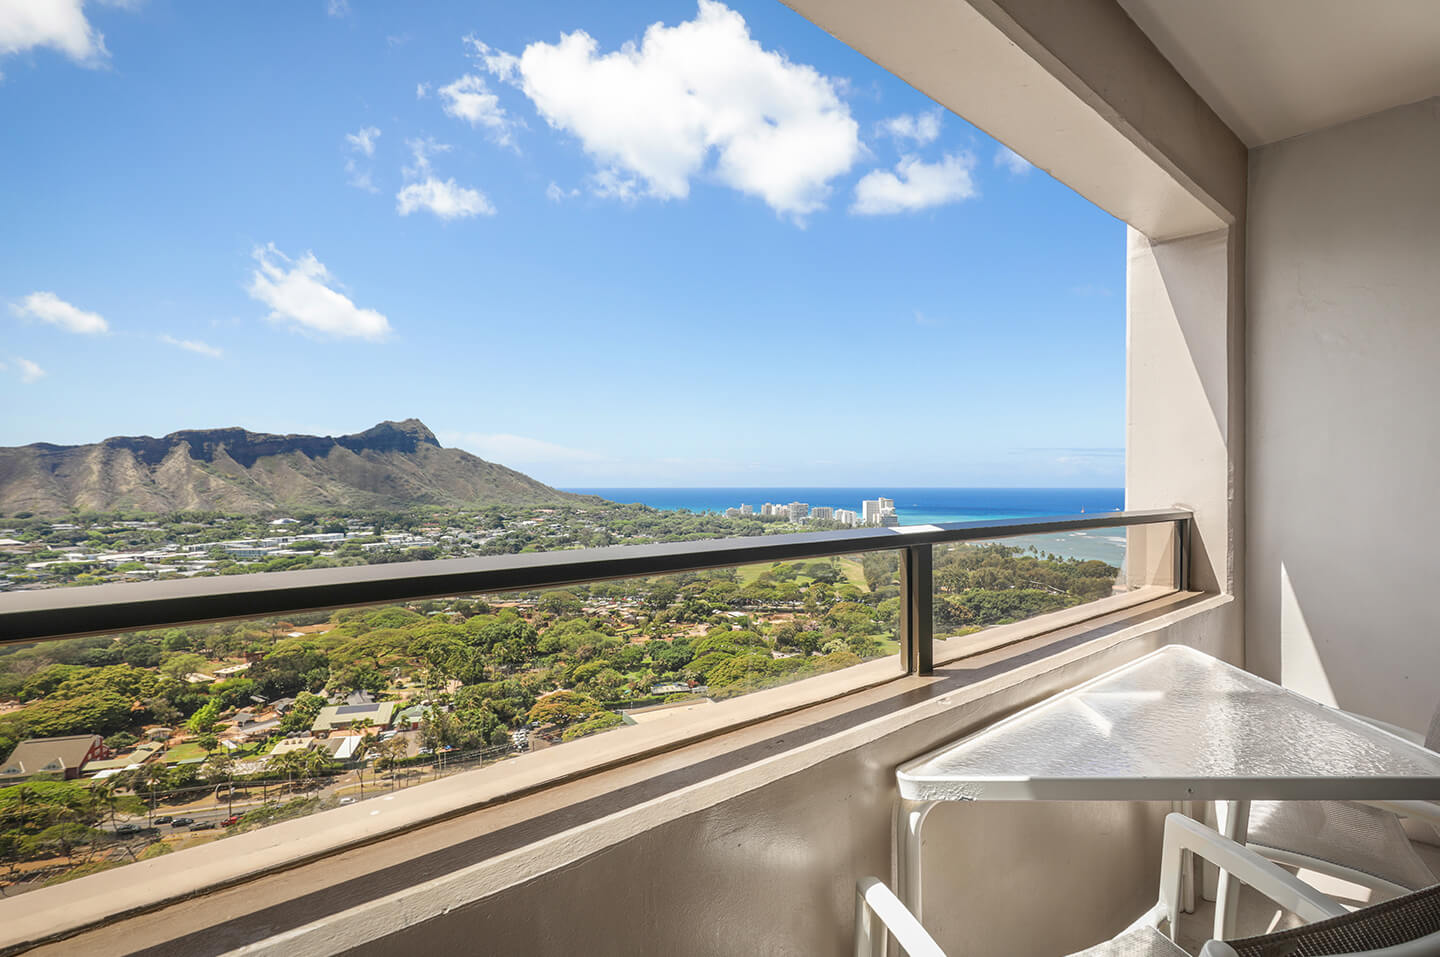 Two-Bedroom Partial Ocean View Balcony Overlooking Daimond Head and Waikiki